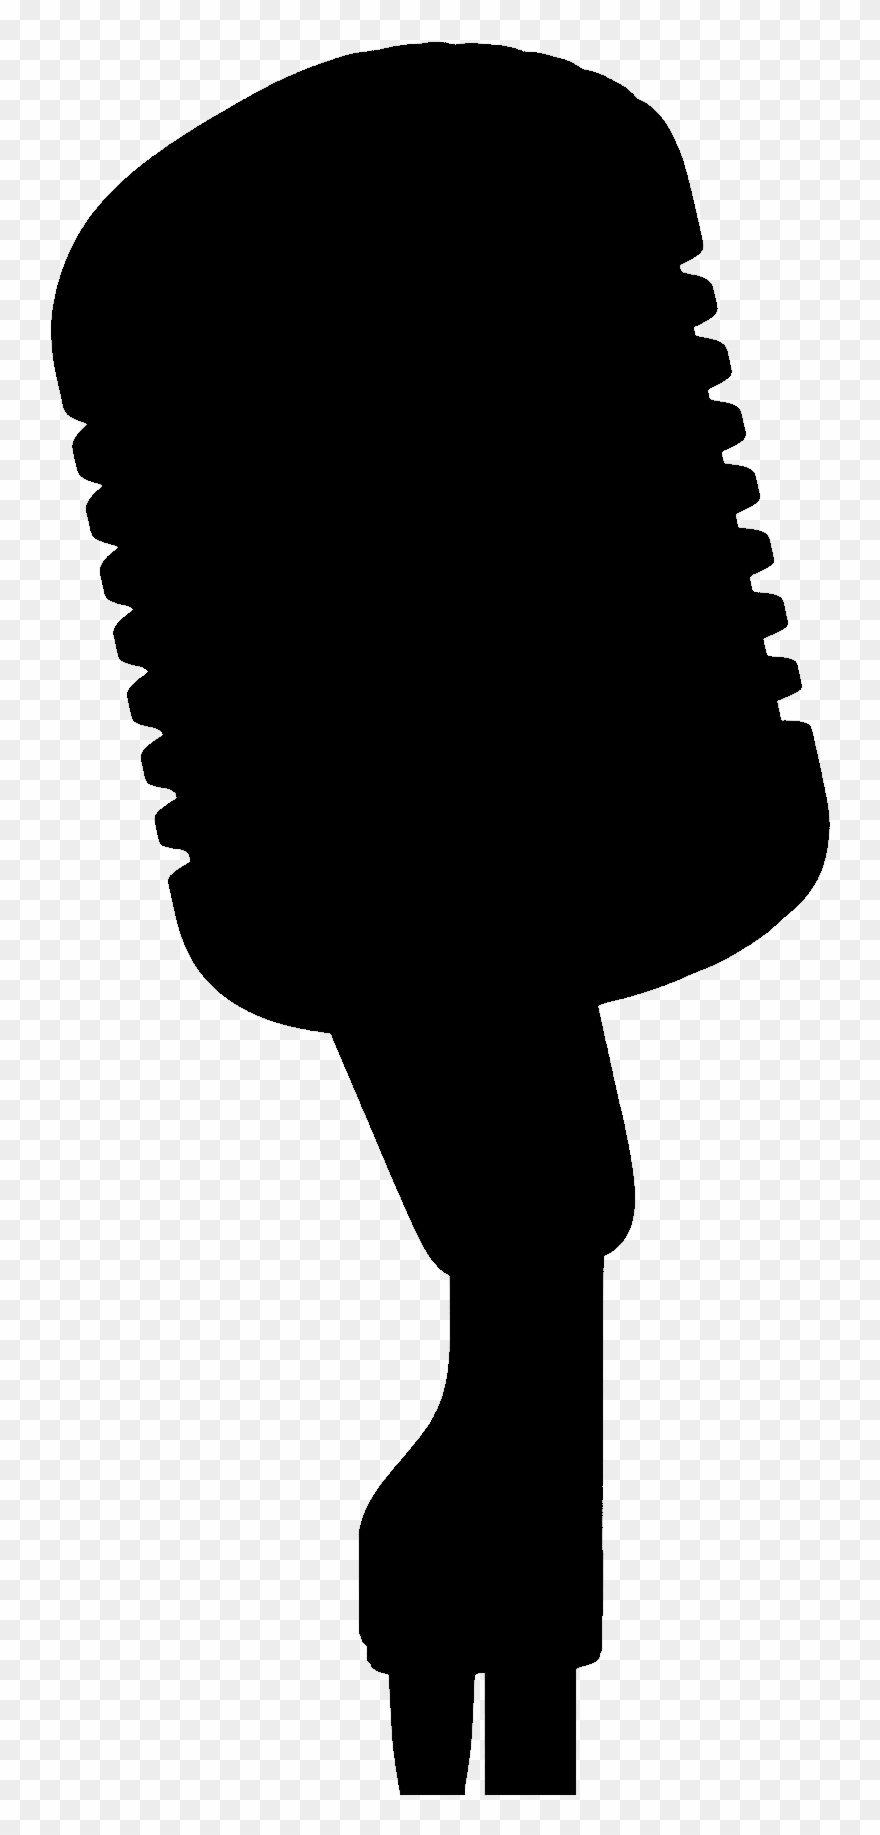 Microphone silhouette microphone.